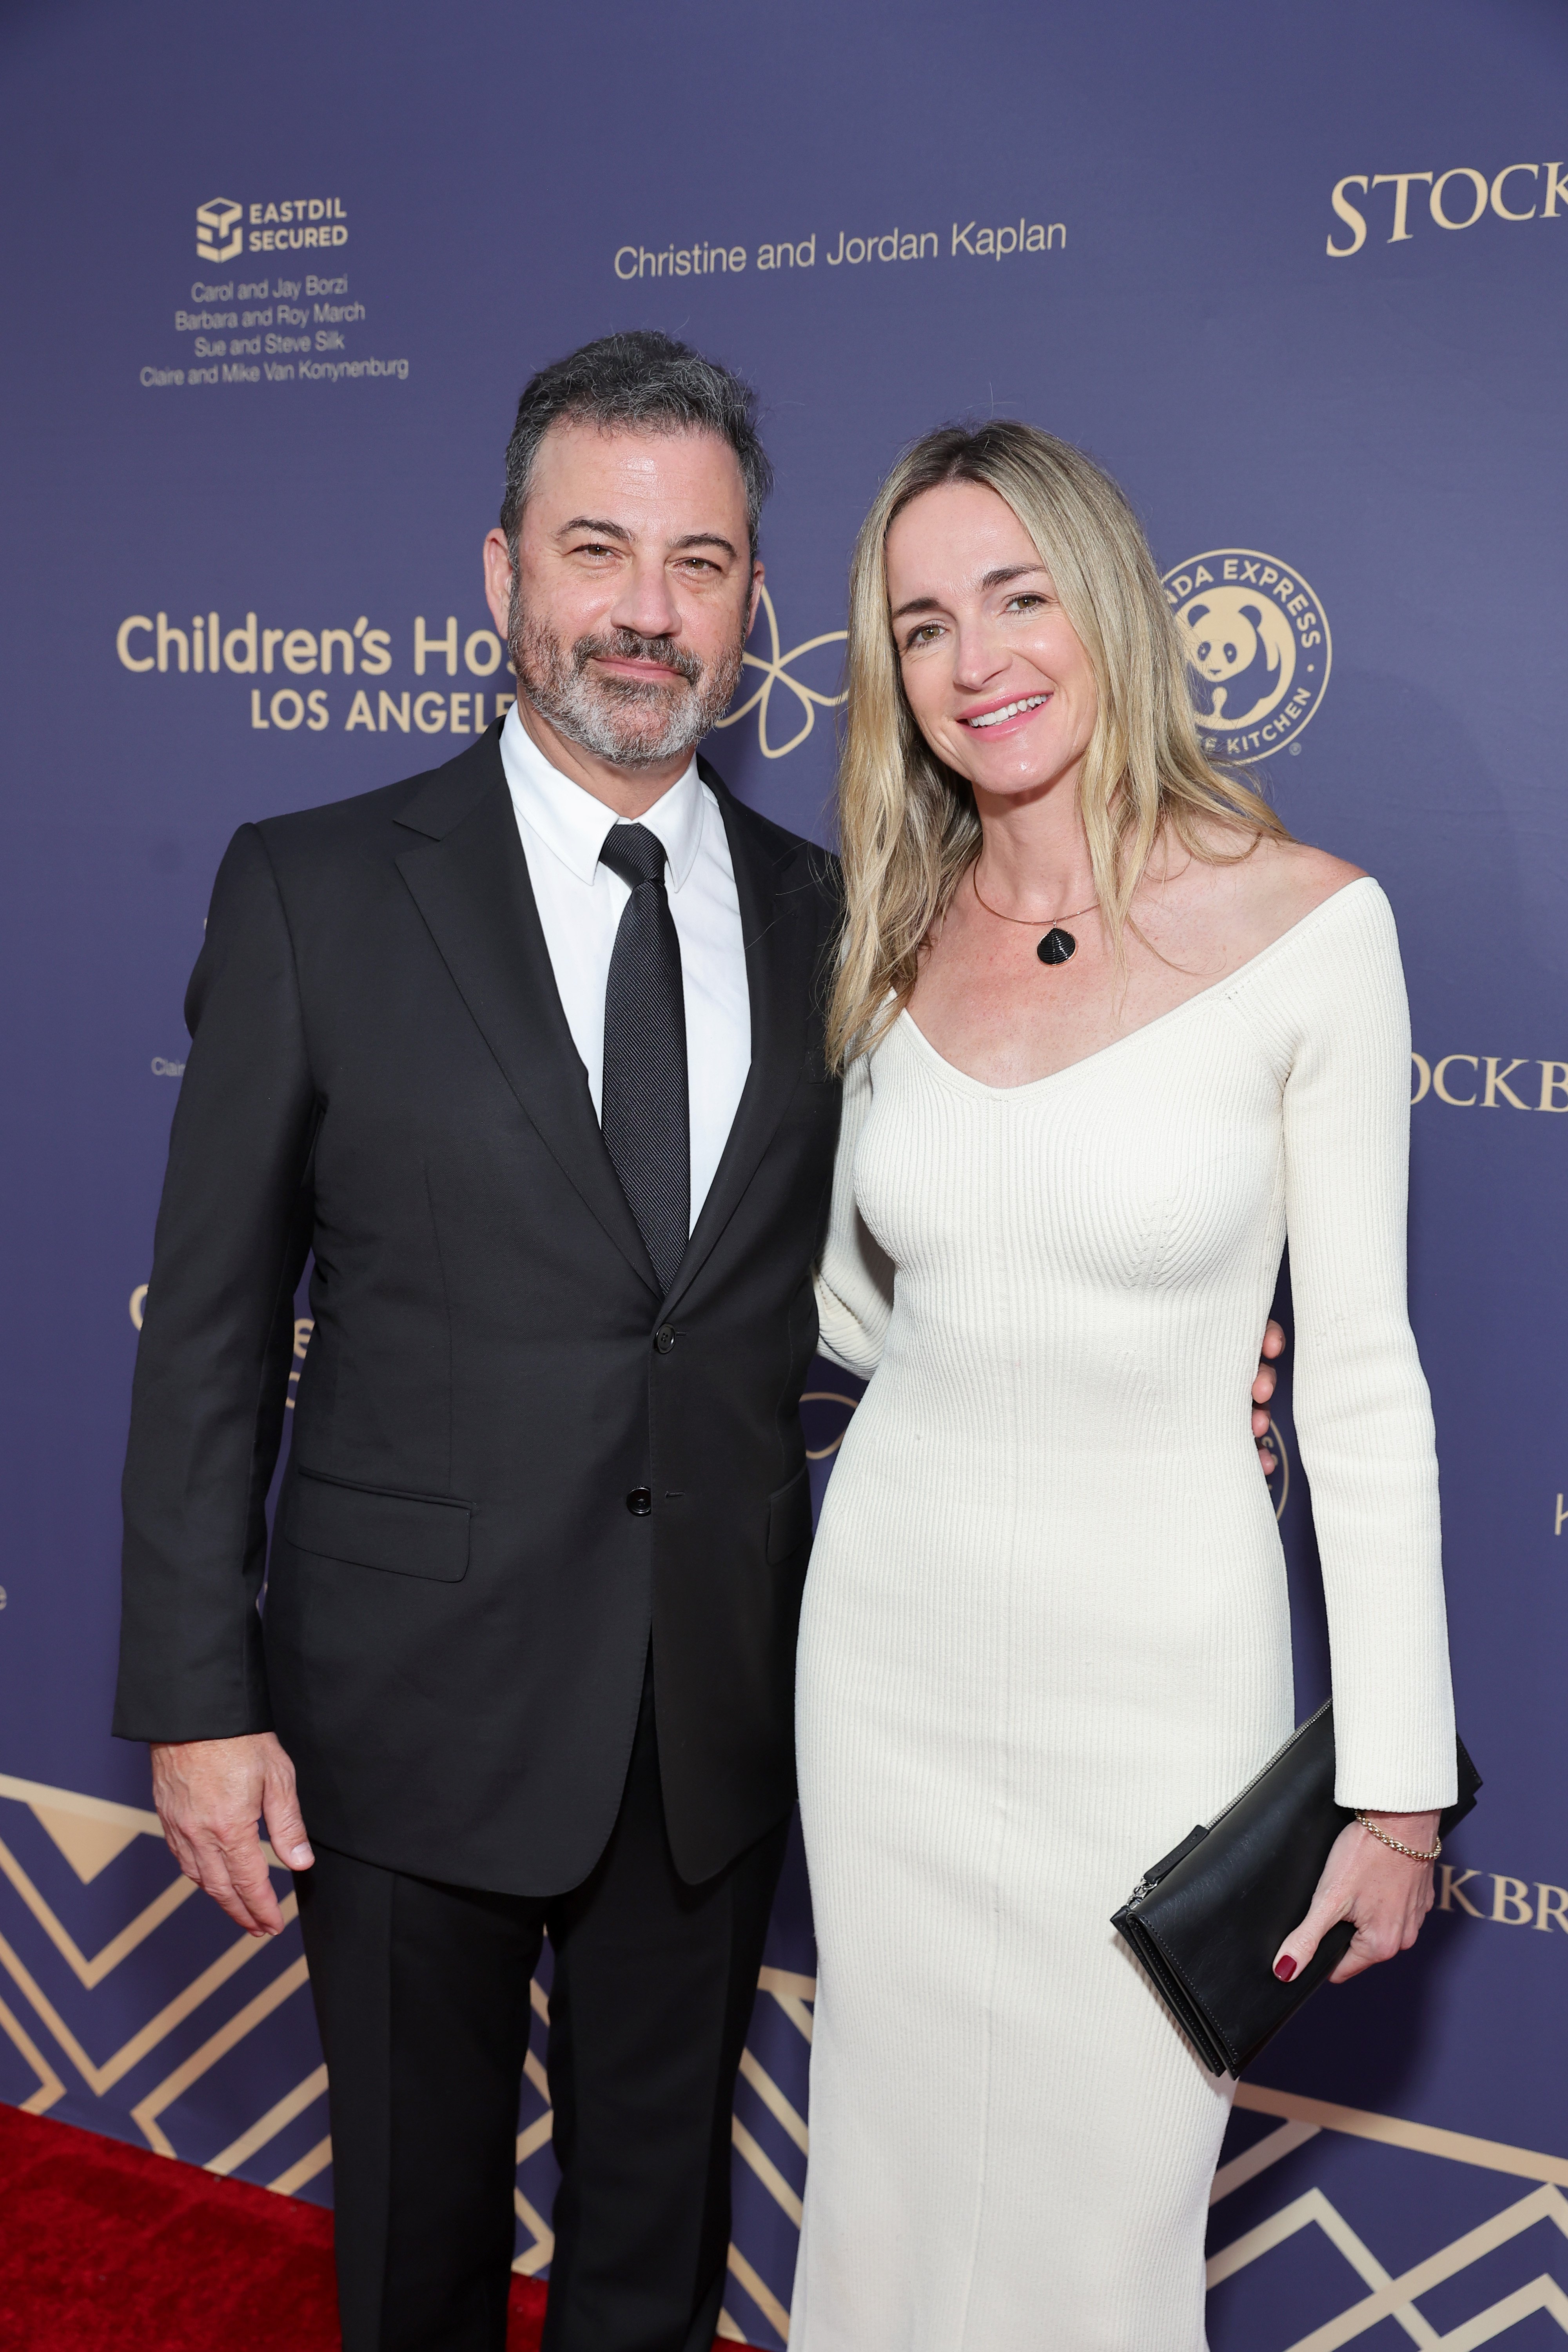 Jimmy Kimmel and Molly McNearney attend the 2022 Children’s Hospital Los Angeles Gala at the Barker Hangar on October 08, 2022 in Santa Monica, California. | Source: Getty Images